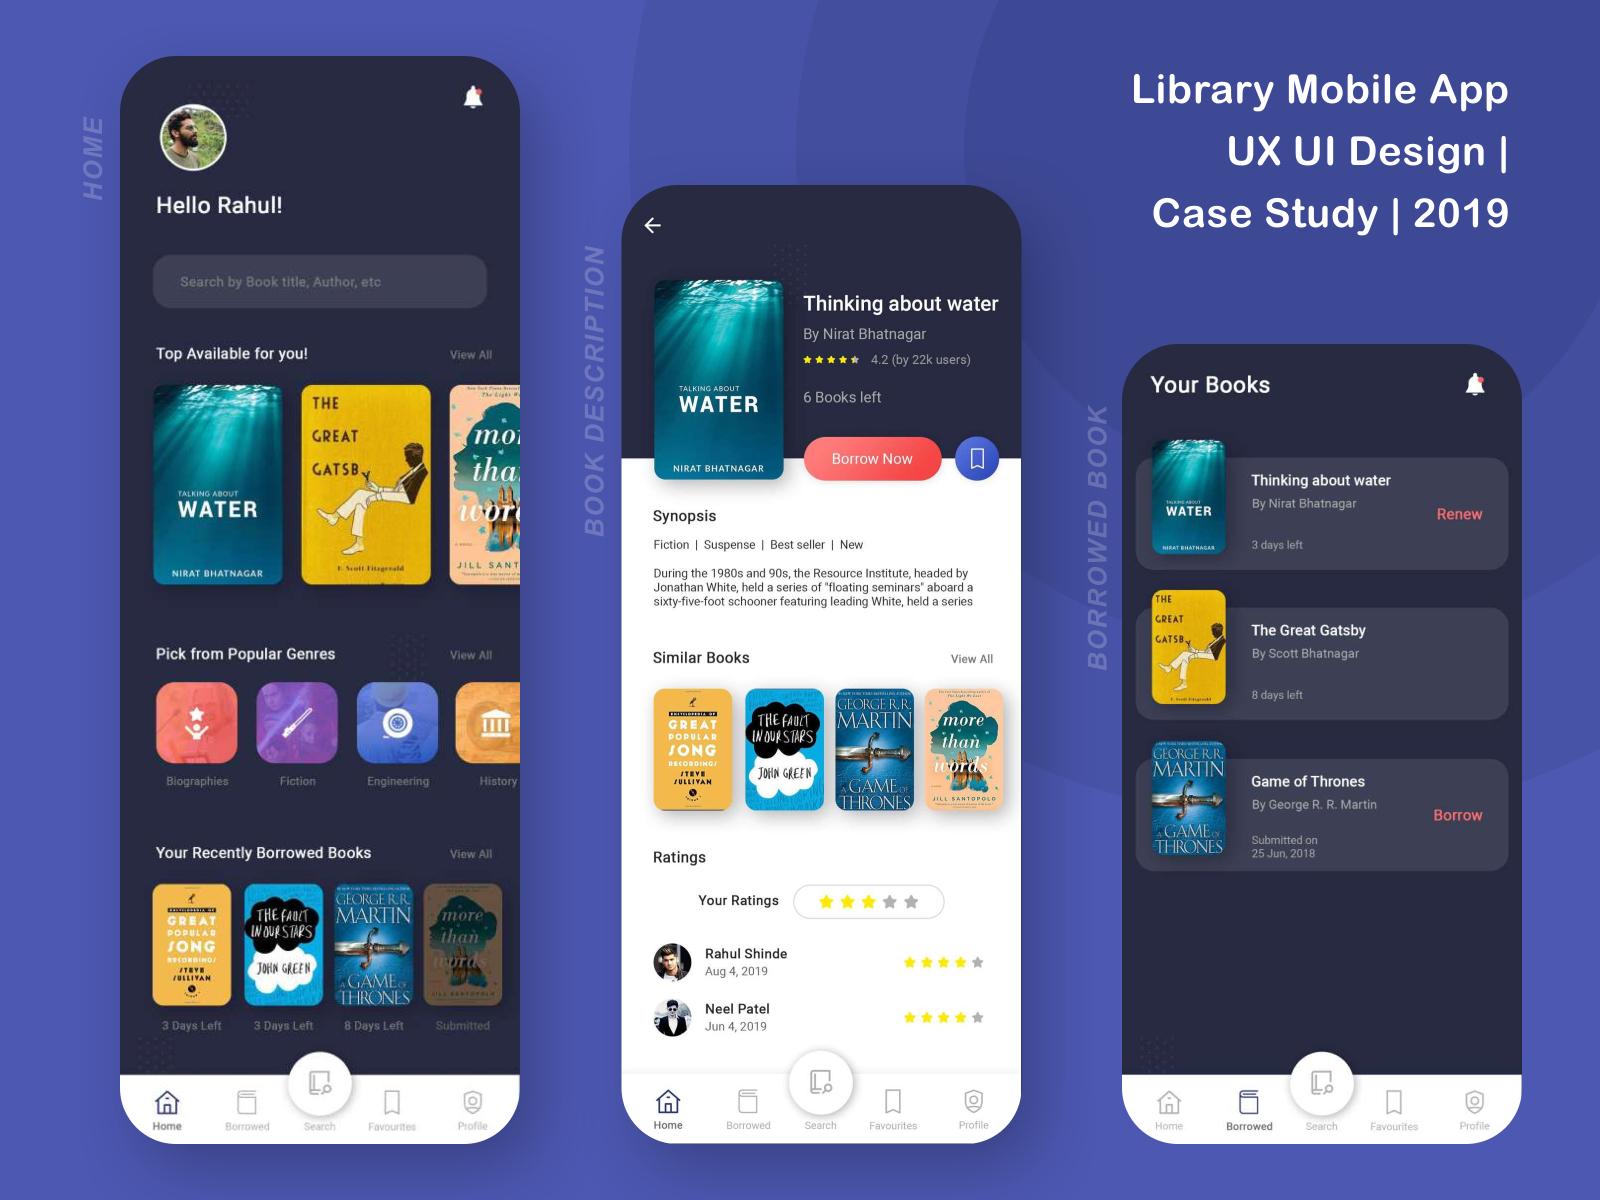 Library Mobile App  UX UI Design Case Study  by Rahul 